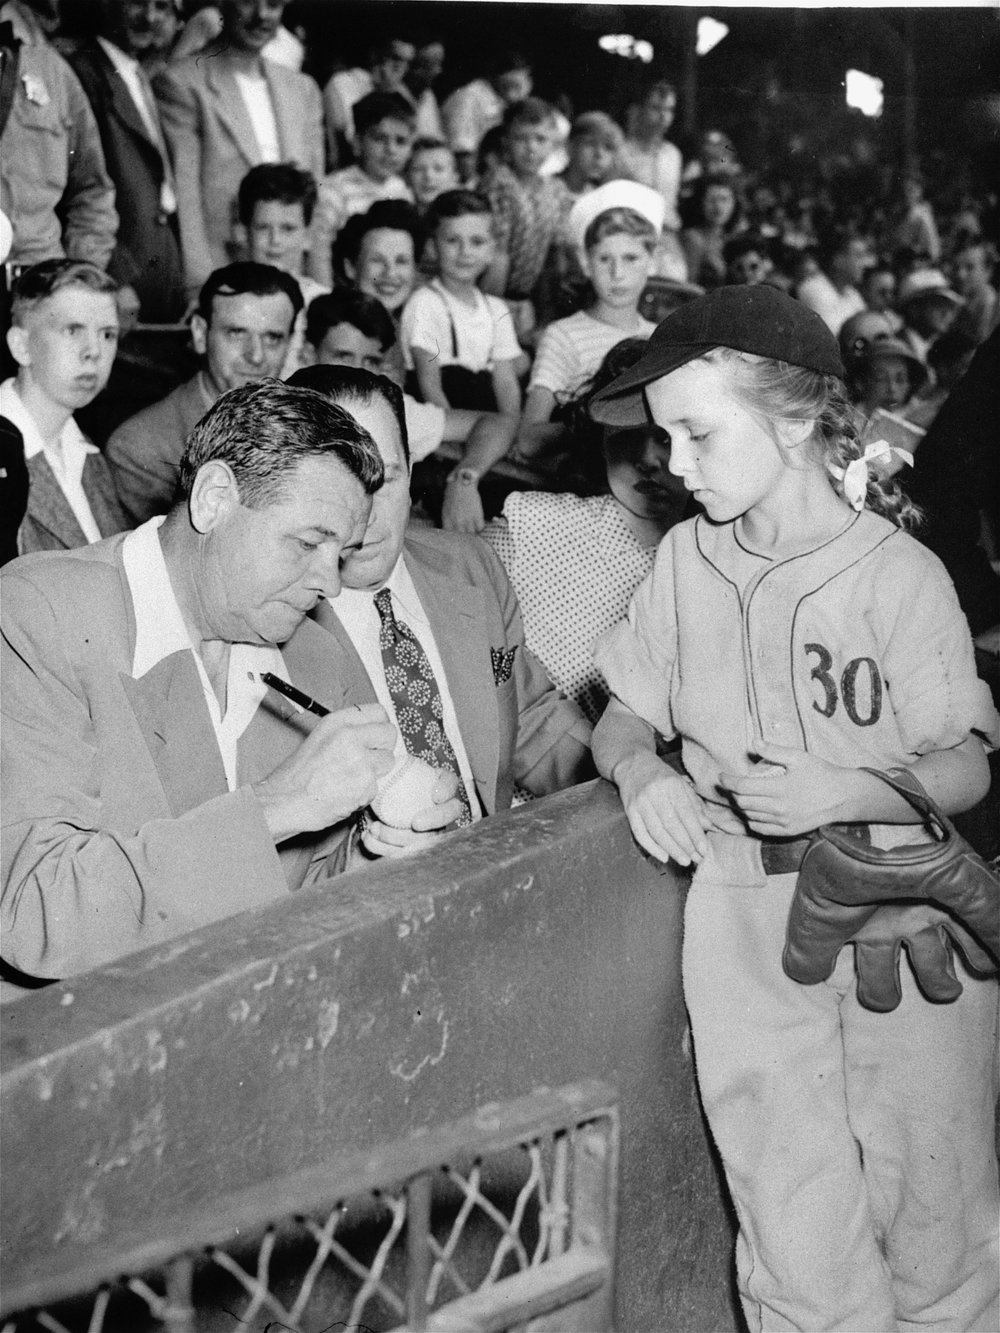  Babe Ruth, home run king of the major leagues and former right fielder for the New York Yankees, autographs a baseball for 10-year-old Monica Meehan, who plays right field for a Philadelphia midget team.  The Babe was the guest of honor today, July 